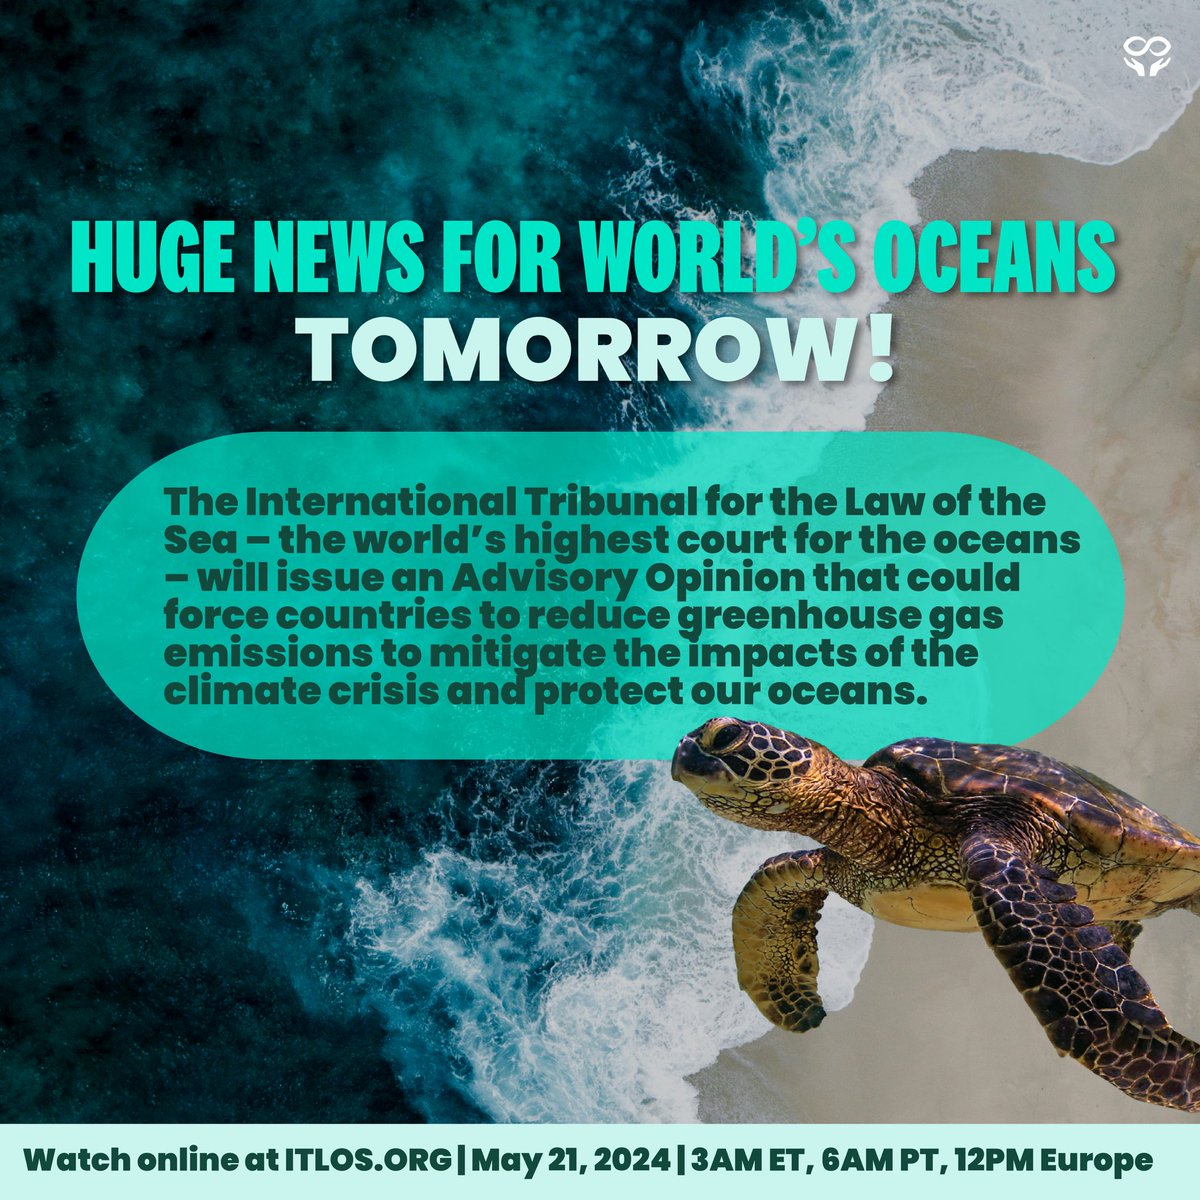 In June 2023, Our Children’s Trust along with 24 young people and @Oxfaminternational submitted an Amicus Curiae Brief in this case, calling on the Tribunal to base its opinion on the best scientific evidence – to halt GHG emissions to preserve our oceans for all humanity.